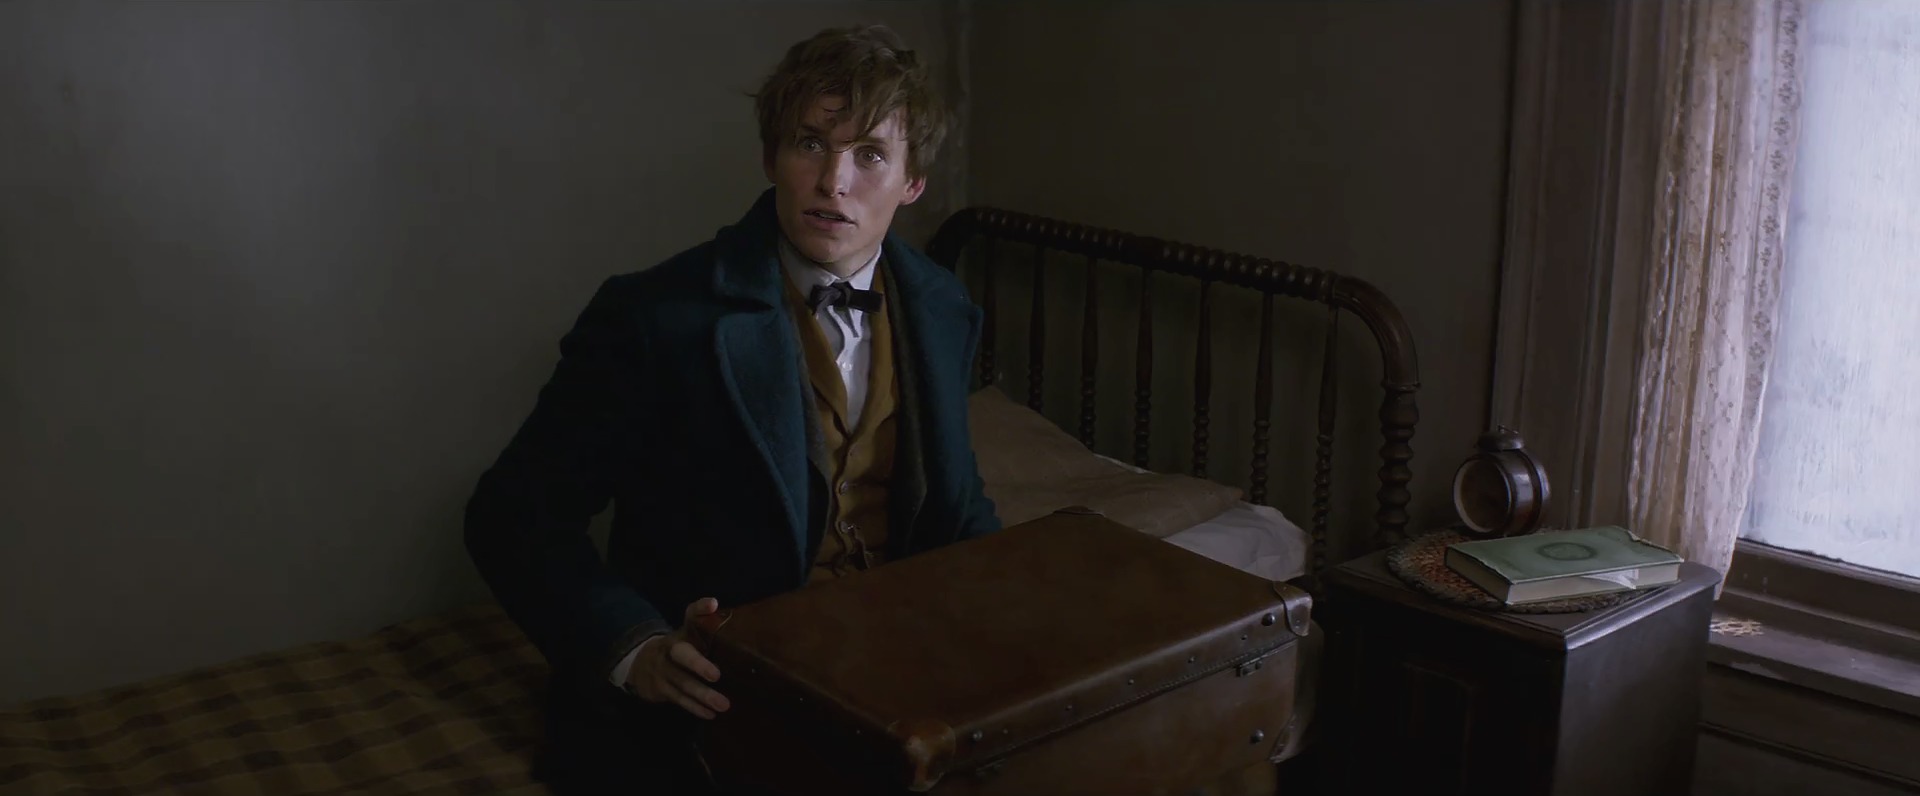 Film 2016 Watch Online Fantastic Beasts And Where To Find Them